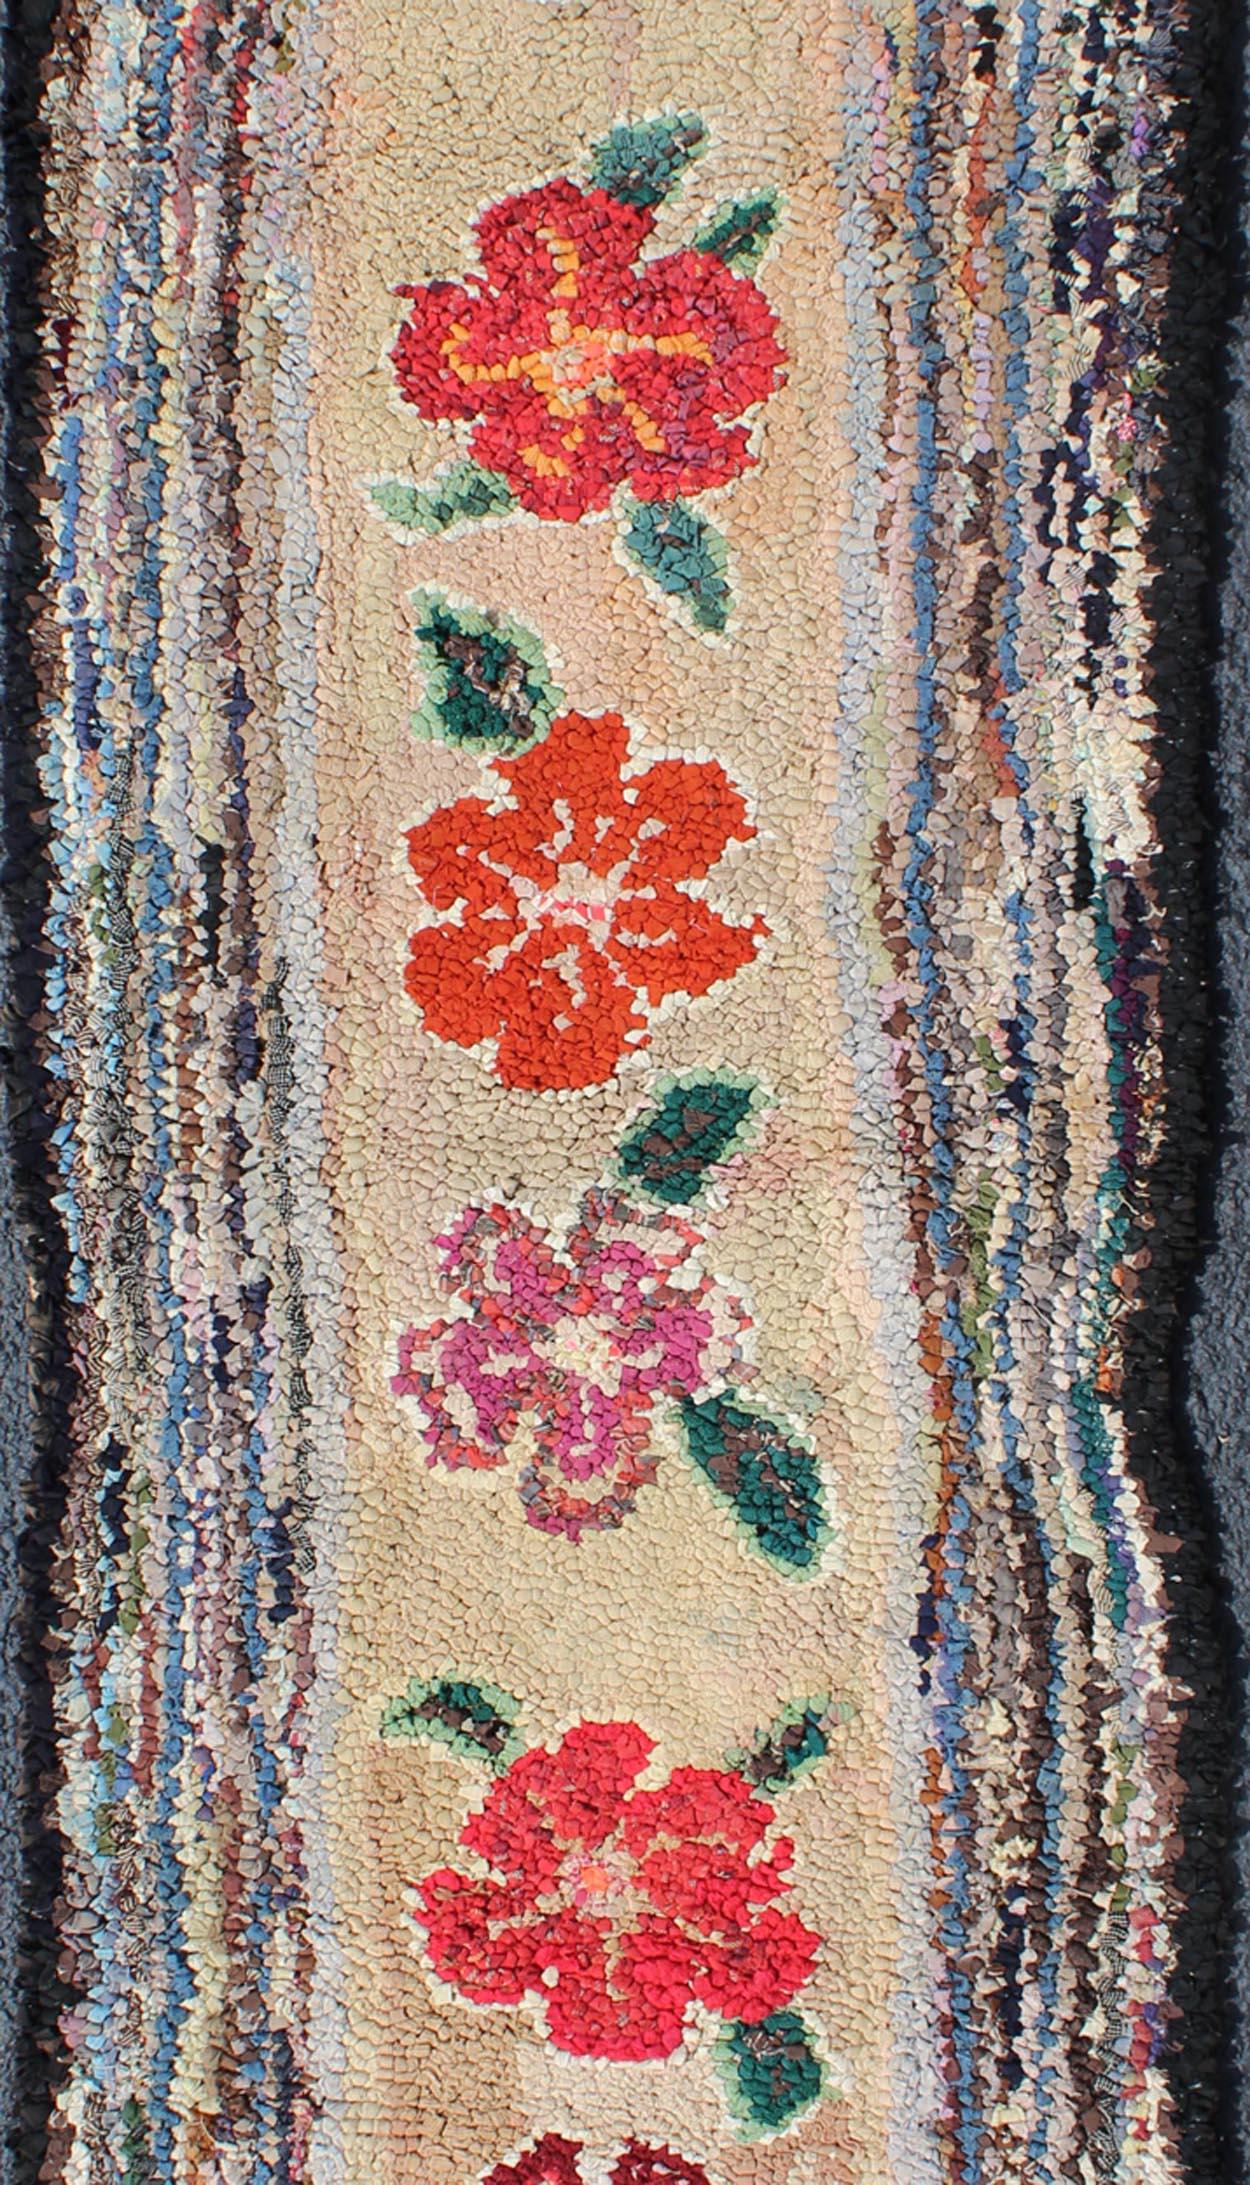 American Hooked runner with colorful vertical medallion design, Keivan Woven Arts / rug L11-1210, country of origin / type: United States / hooked, circa 1920.

This American Hooked rug depicts a beautiful design of vertically-arranged floral